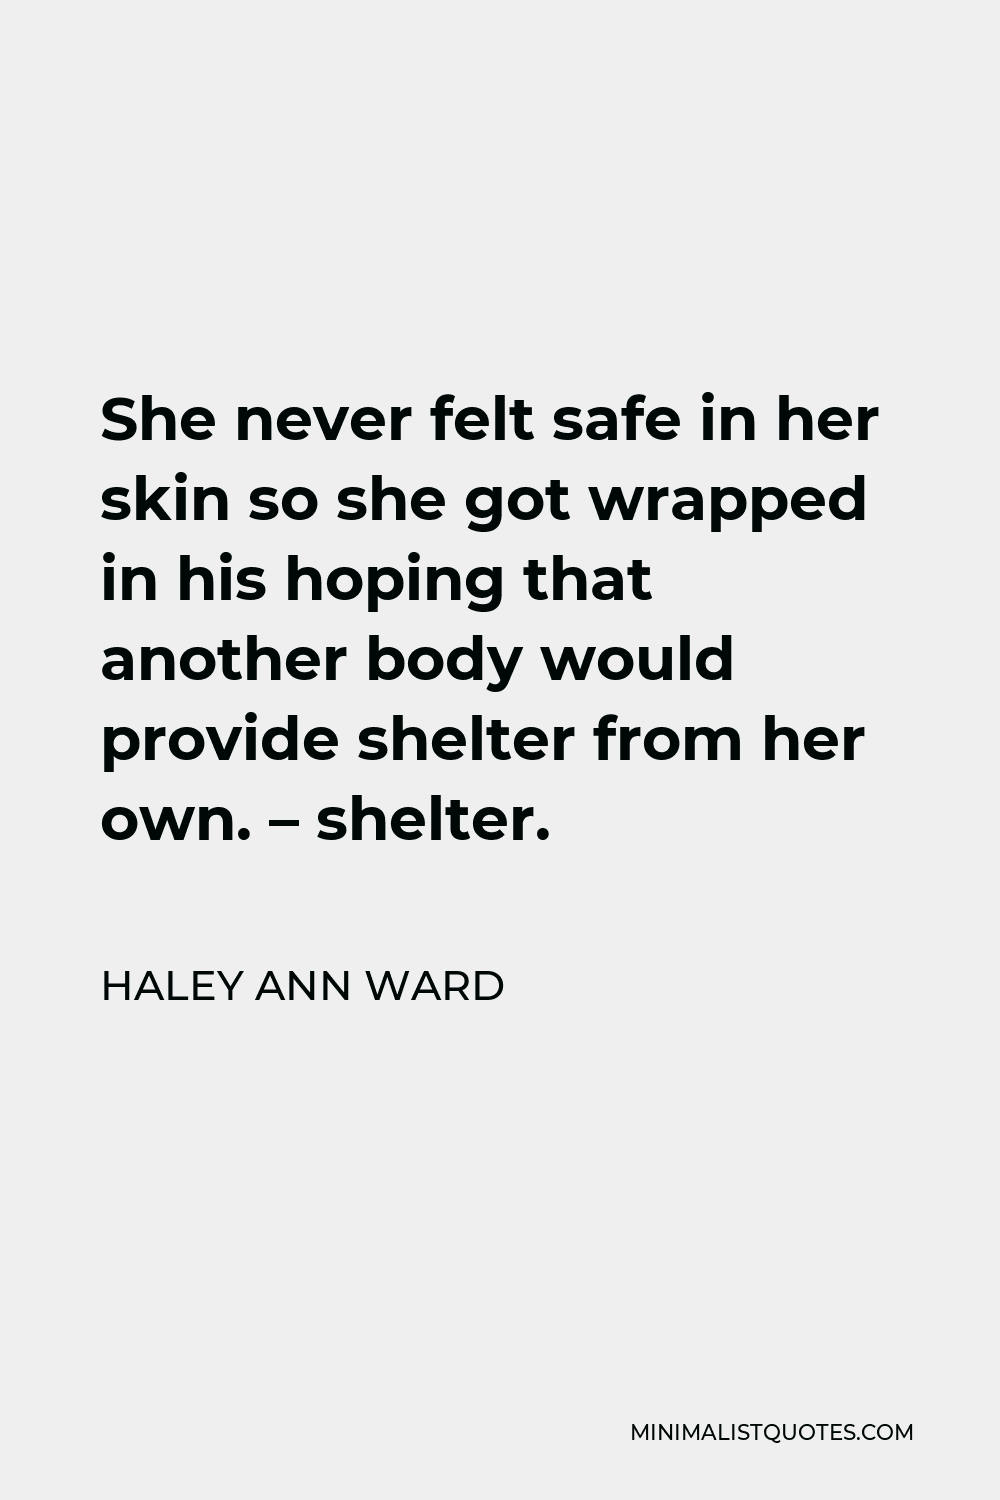 Haley Ann Ward Quote - She never felt safe in her skin so she got wrapped in his hoping that another body would provide shelter from her own. – shelter.